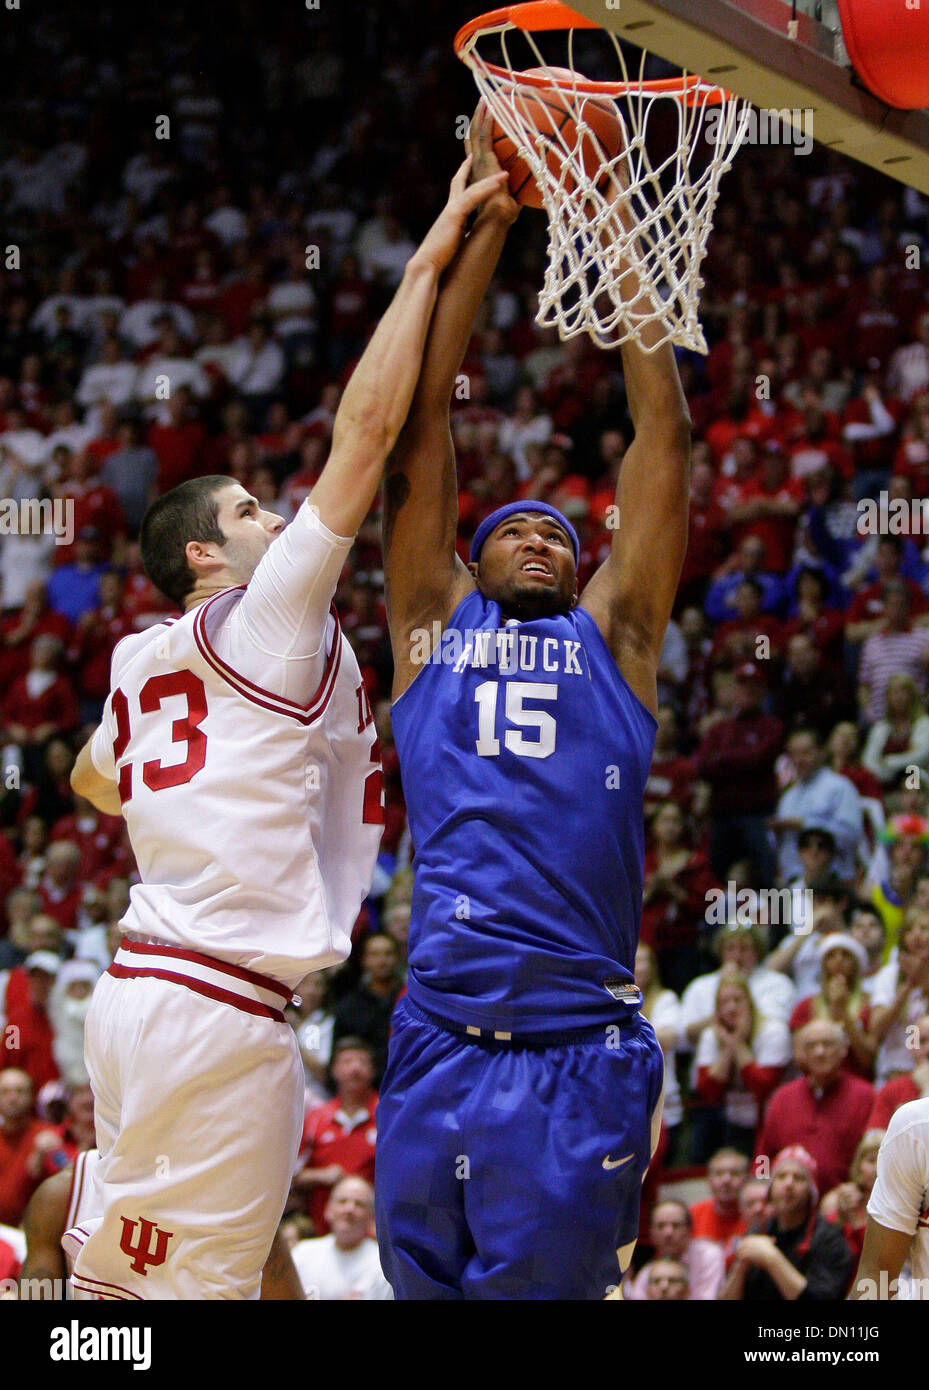 Dec. 12, 2009 - Bloomington, Kentucky, USA - Kentucky's DeMarcus Cousins put in two of his 14 points over Indiana's Bobby Capobianco, as Kentucky defeatd  Indiana  90-73 on Saturday December 12, 2009 in Bloomington, Indiana. Photo by Mark Cornelison | Staff. (Credit Image: © Lexington Herald-Leader/ZUMApress.com) Stock Photo